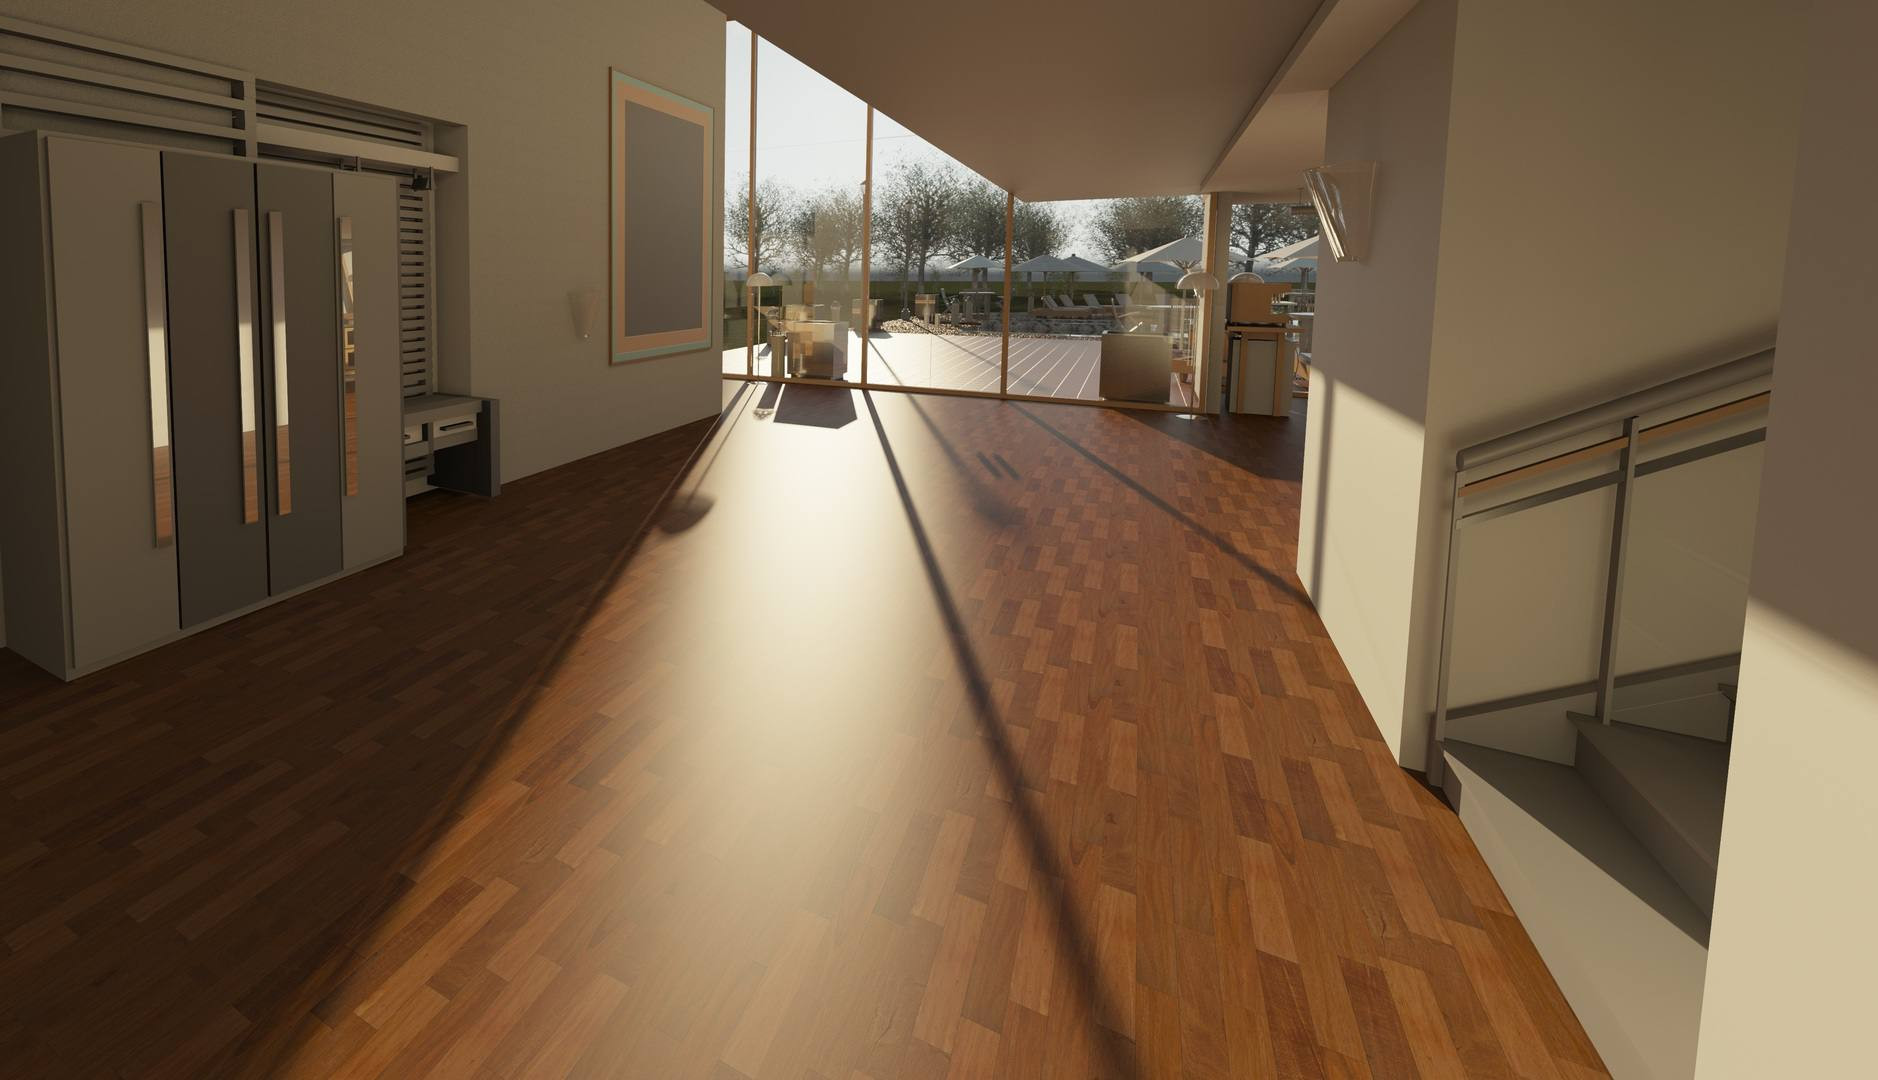 28 Stunning Engineered Wood Flooring Vs solid Hardwood Flooring 2024 free download engineered wood flooring vs solid hardwood flooring of common flooring types currently used in renovation and building throughout architecture wood house floor interior window 917178 pxhere 